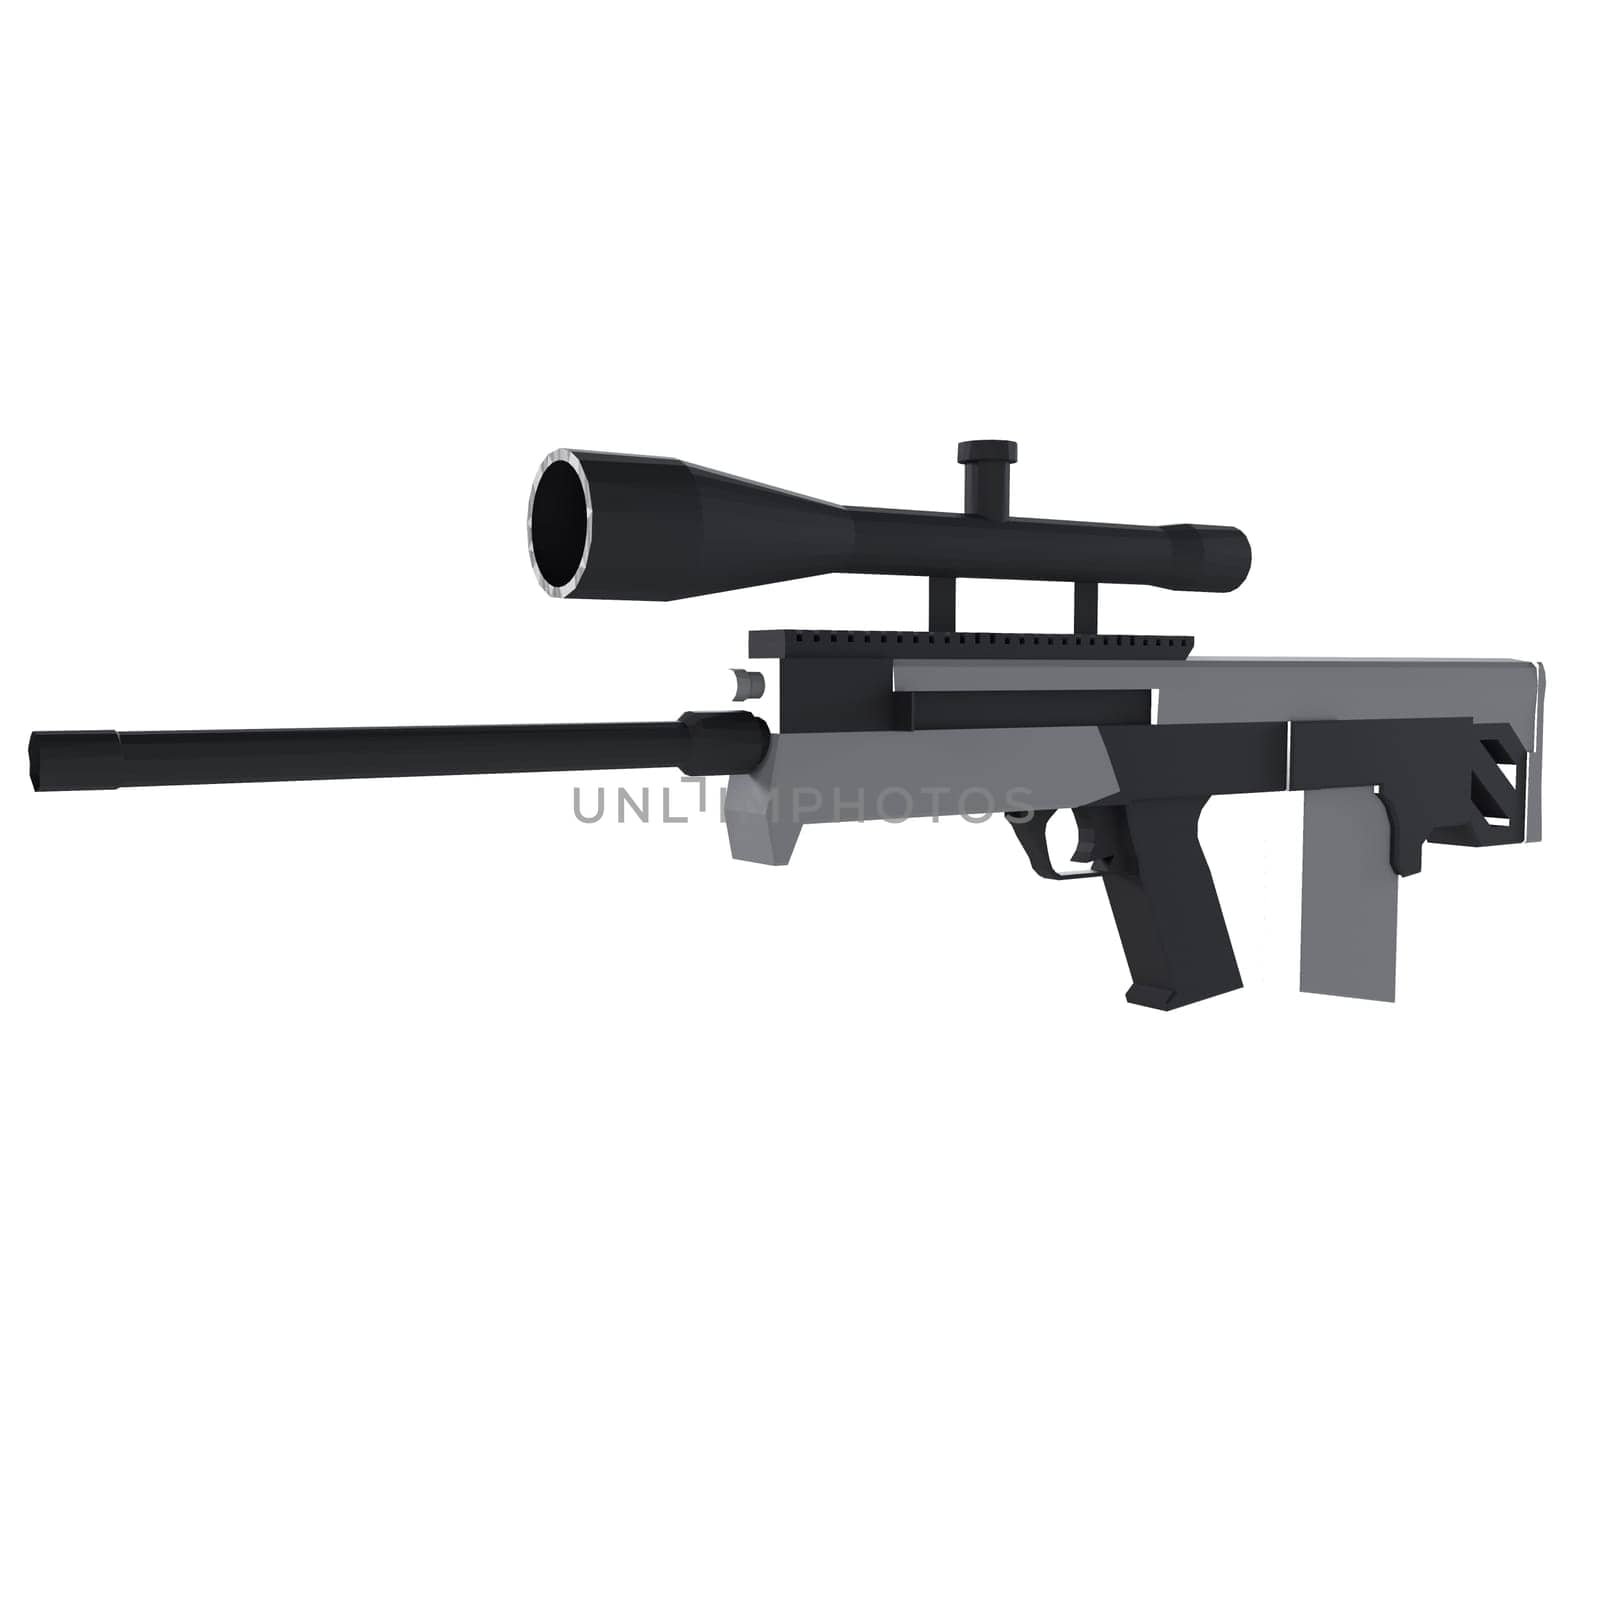 Sniper Rifle isolated on white background. High quality 3d illustration